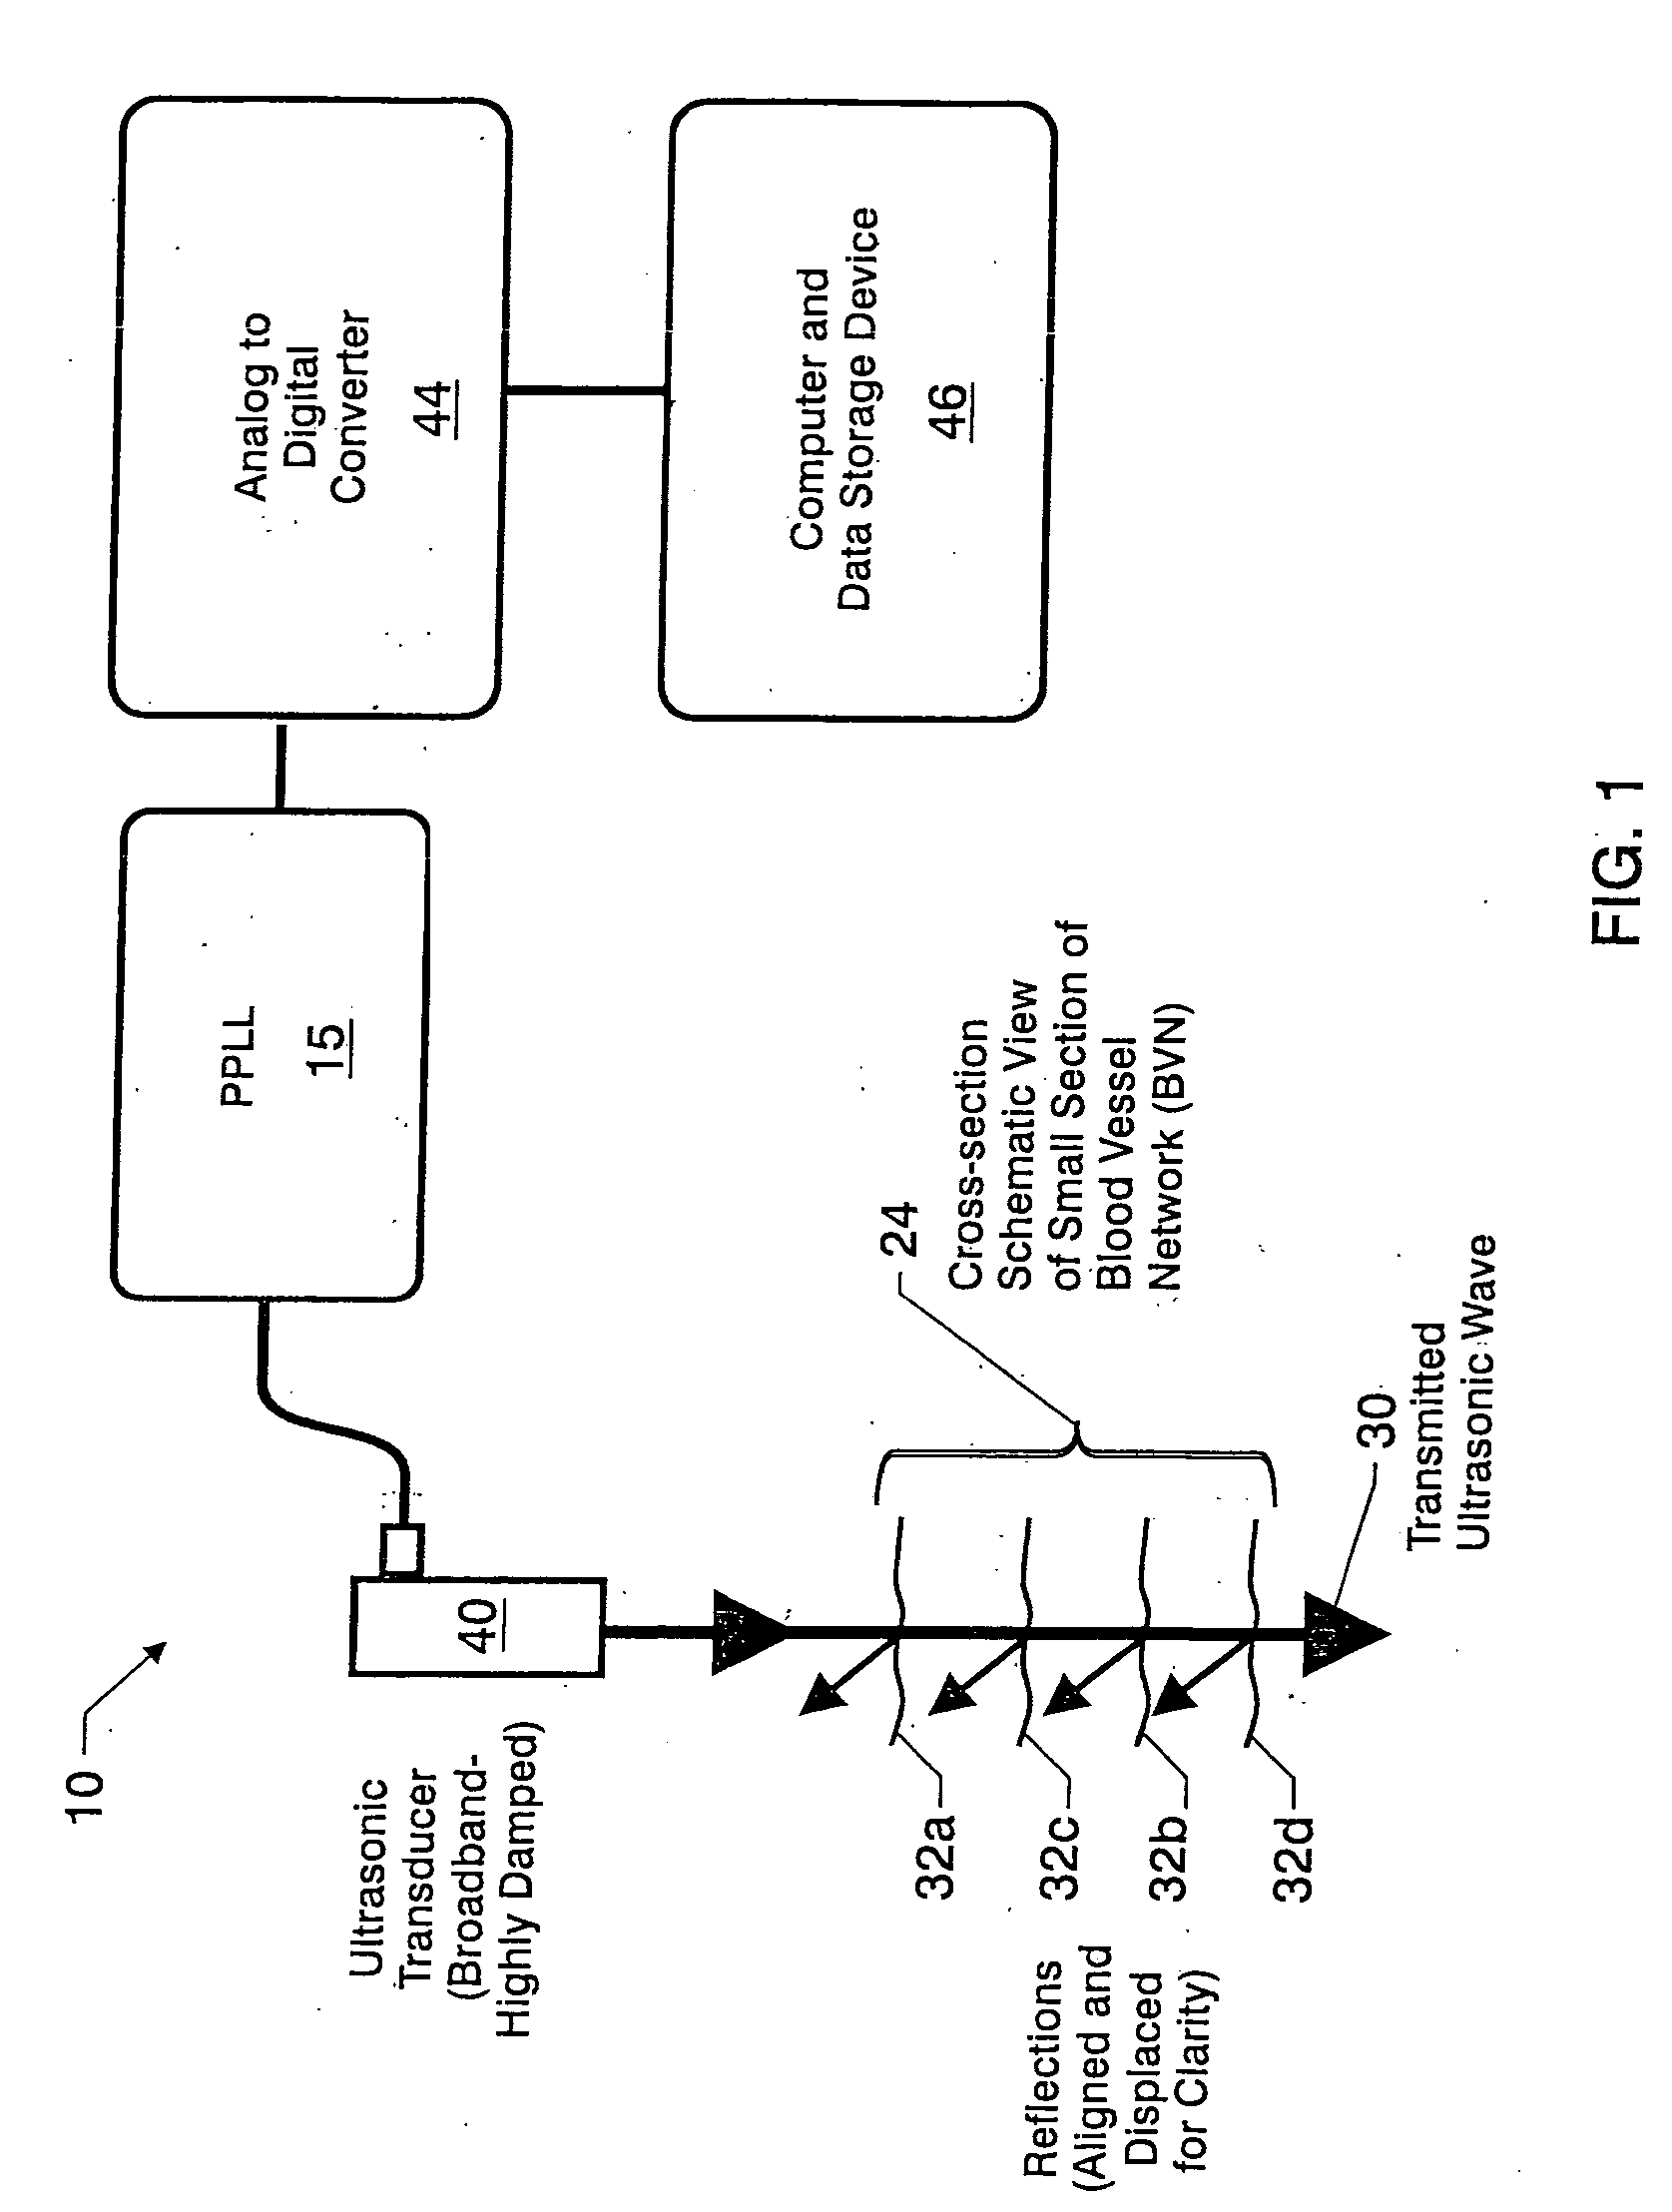 Method and apparatus to assess compartment syndrome